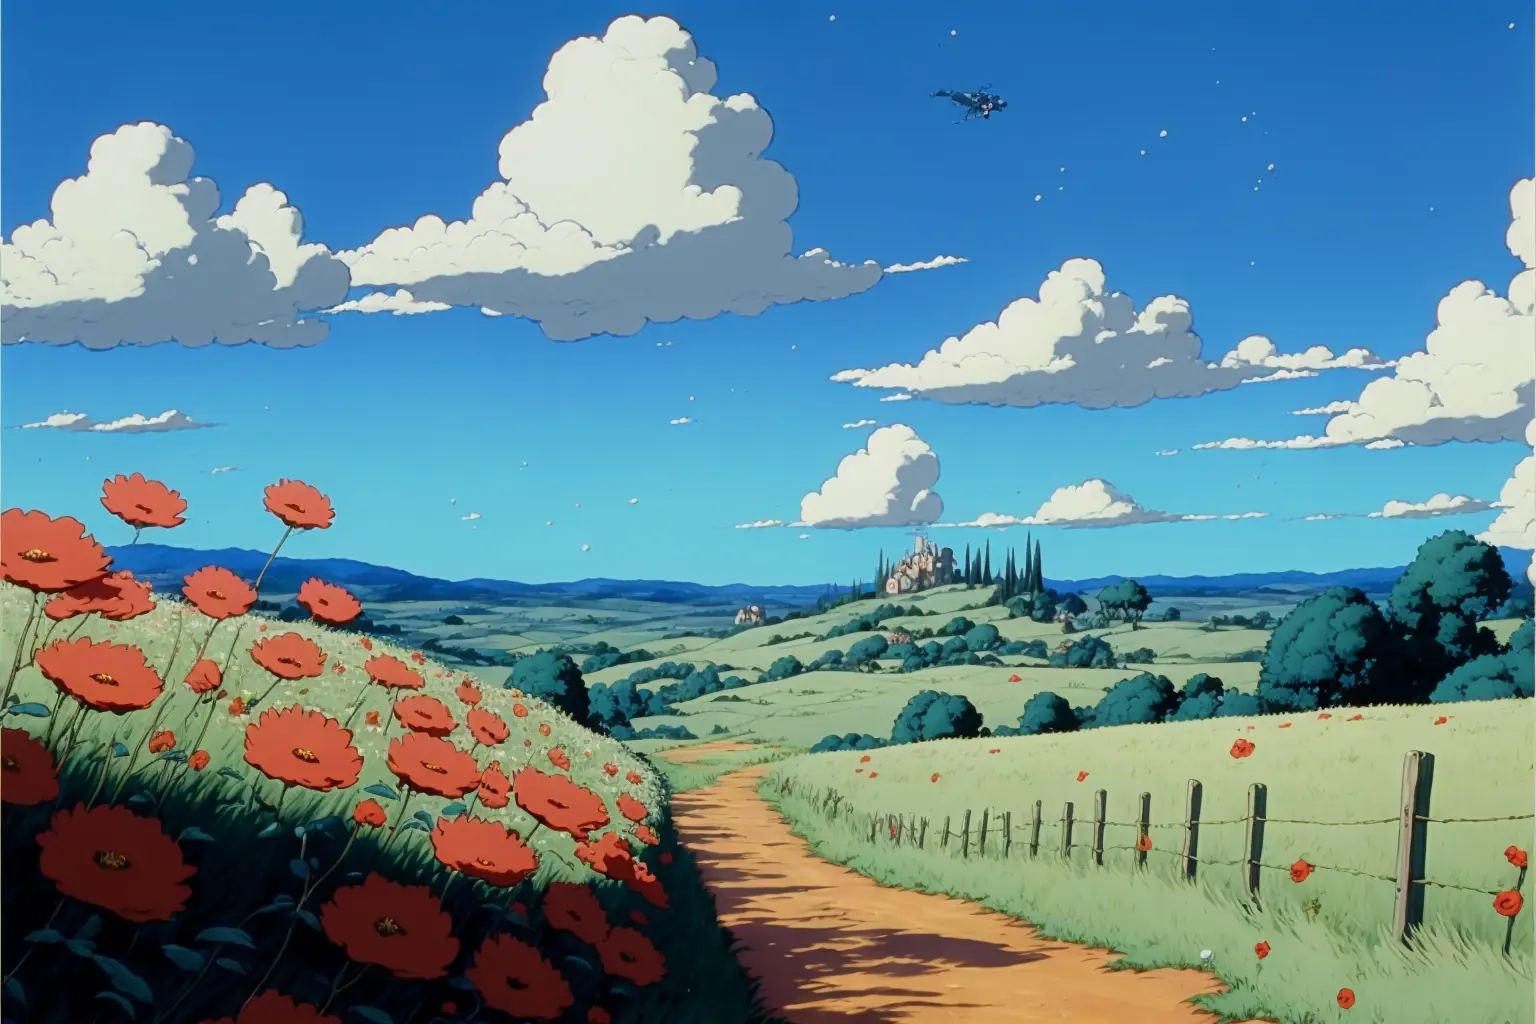 DVD screengrab from studio ghibli movie, beautiful countryside with poppies in the foreground, clouds on blue sky, directed by Hayao Miyazaki, retro anime